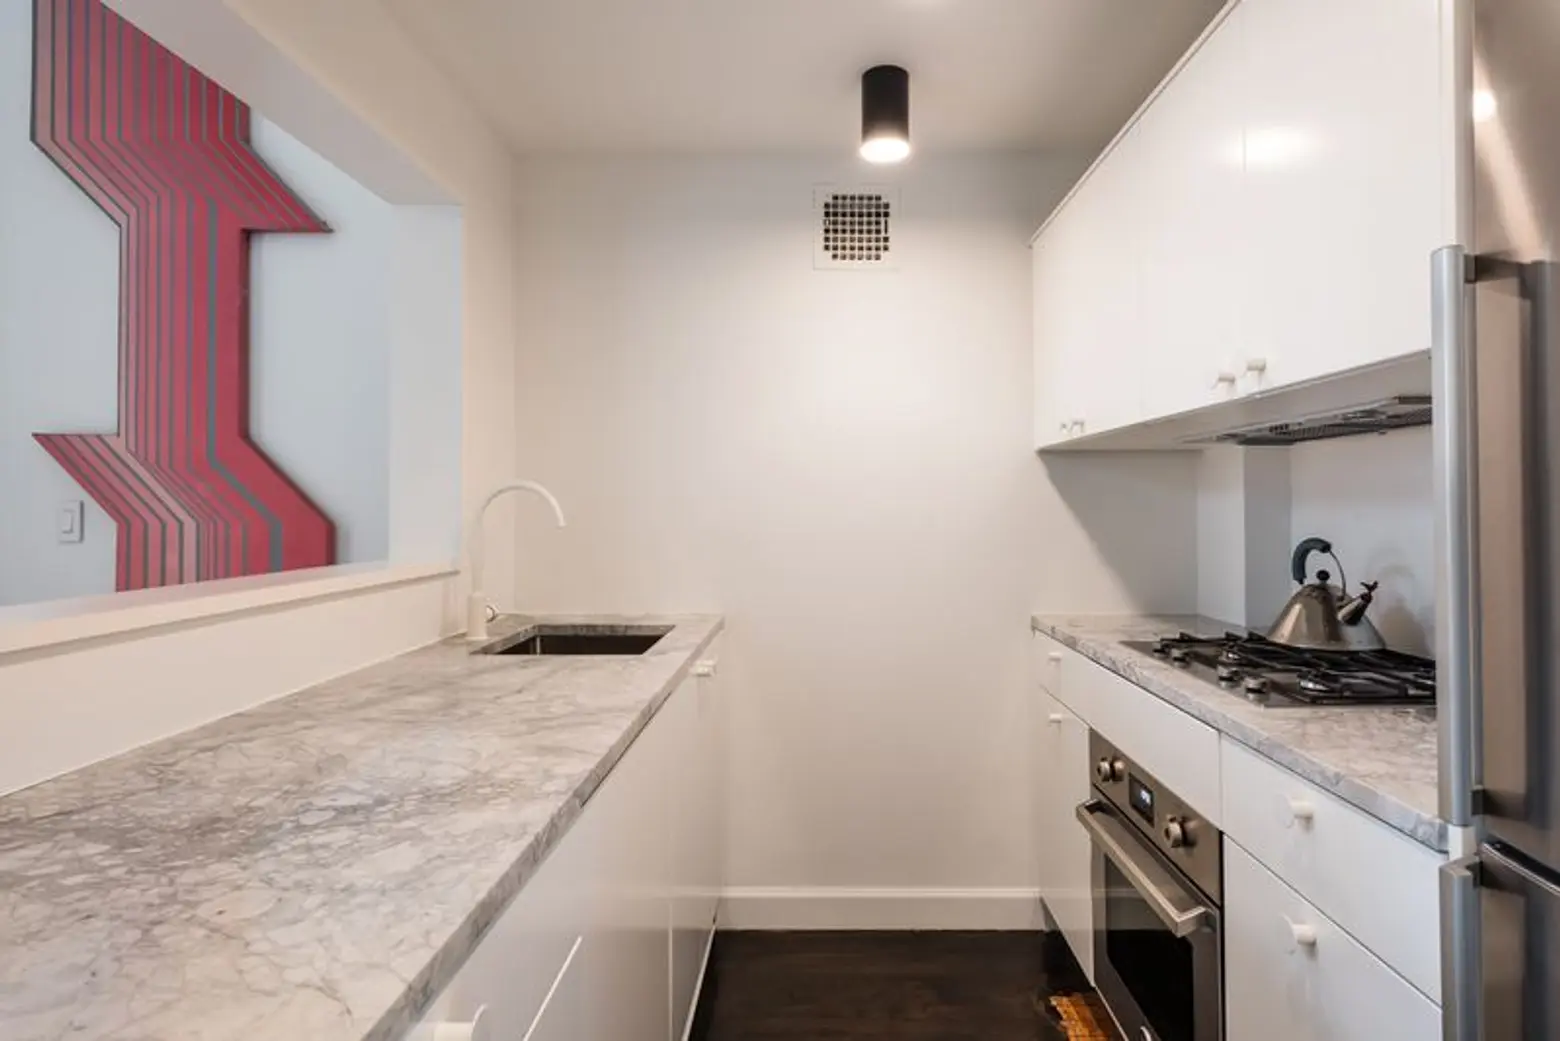 555 Washington avenue, Clinton Hill, Prospect Heights, Cathedral Condo, Brooklyn condo for sale, Interiors, cool listings